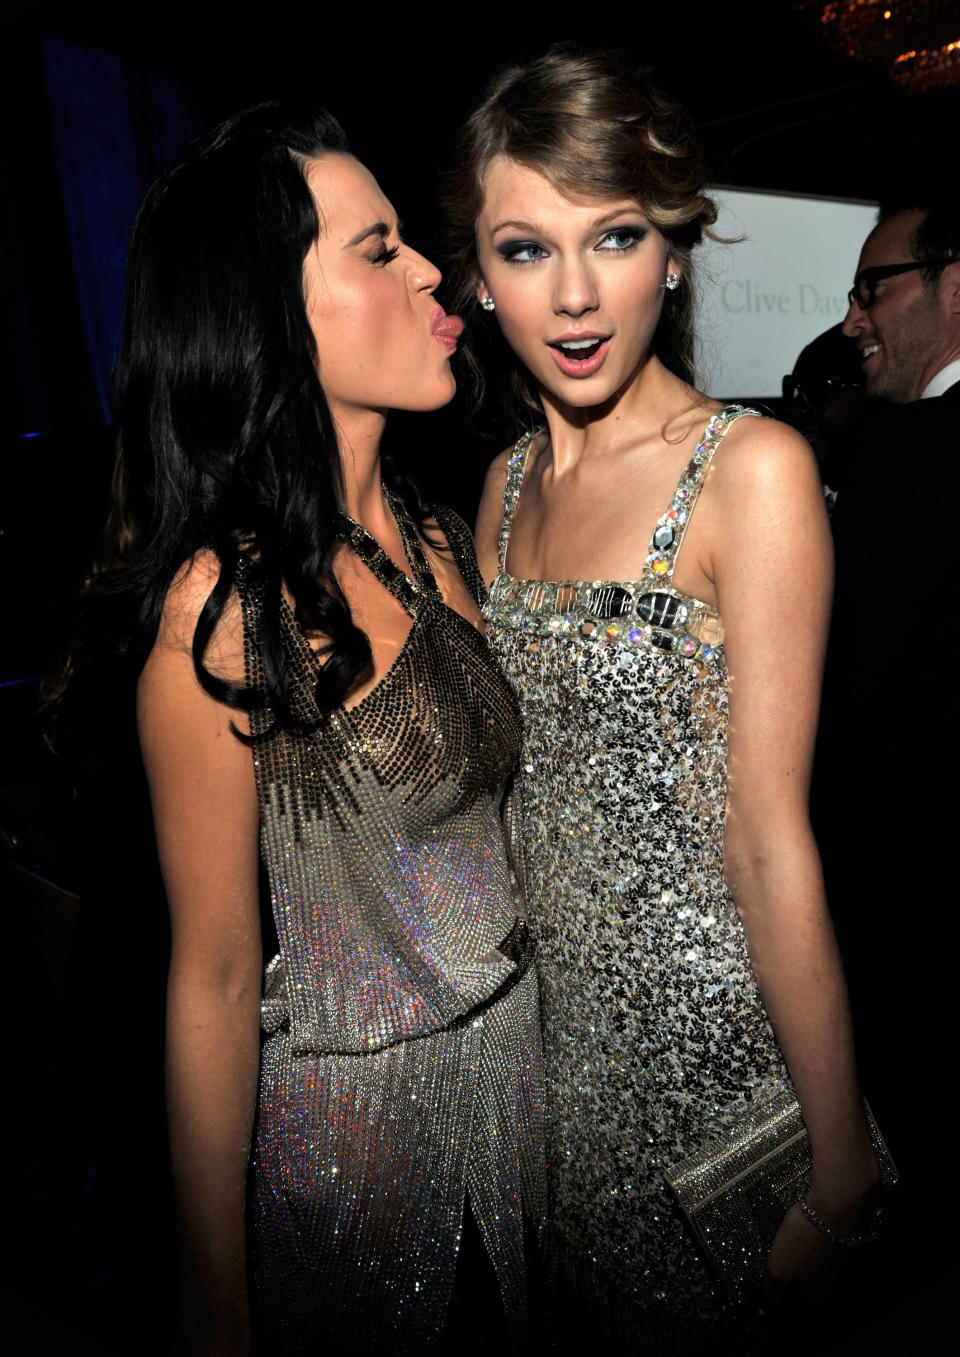 Katy Perry and Taylor Swift at the 2010 Grammys. (Photo: Getty Images)